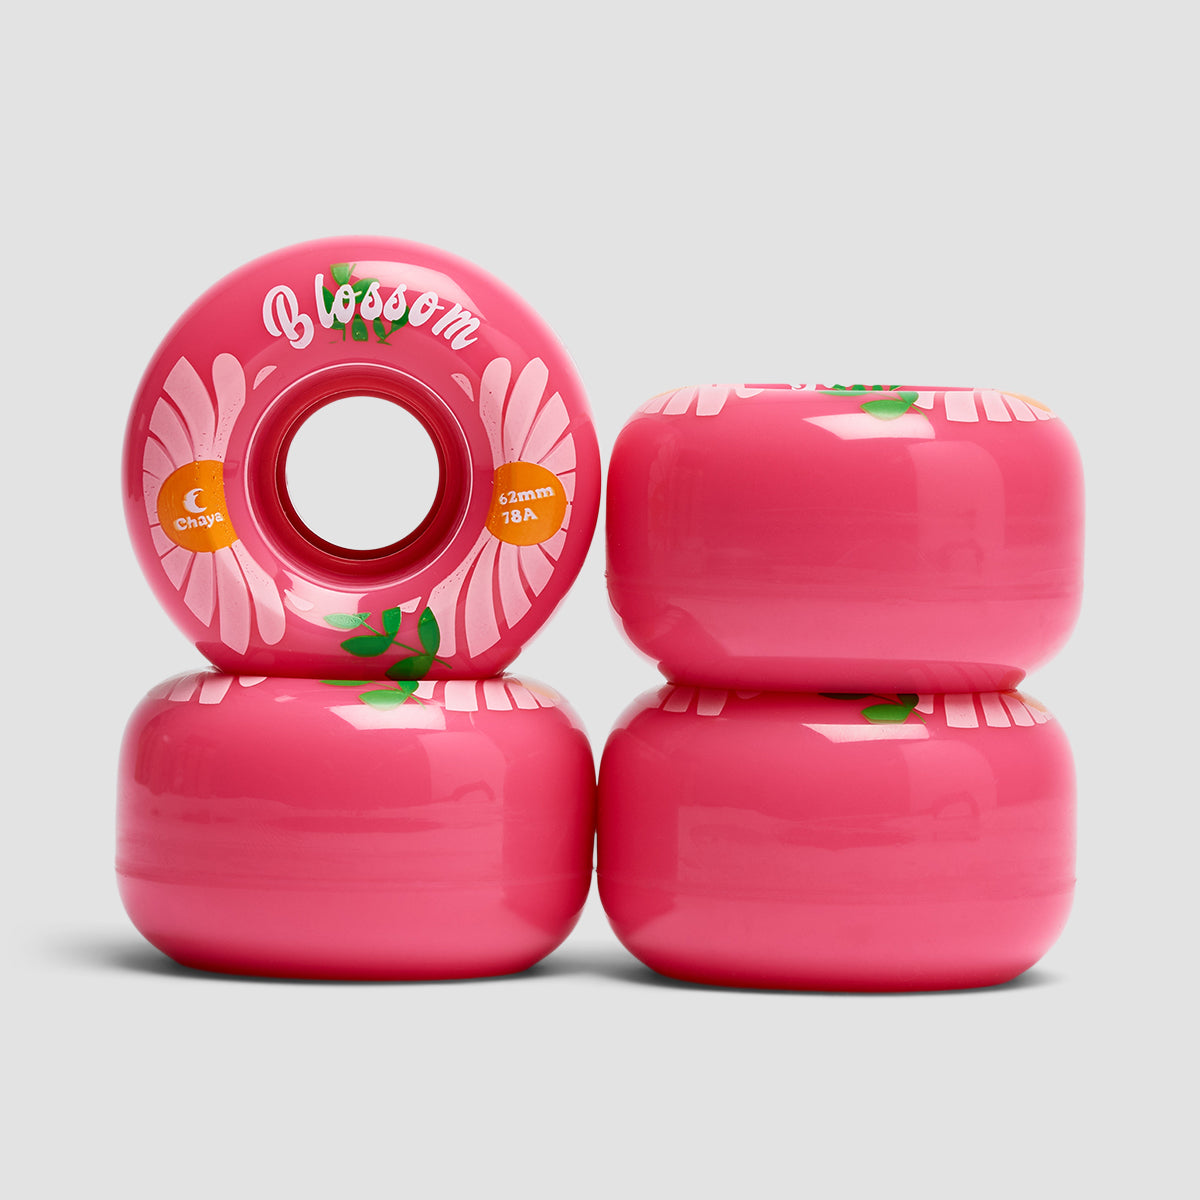 Chaya Blossom 78A Outdoor Quad Wheels X4 Pink/Pink 62mm